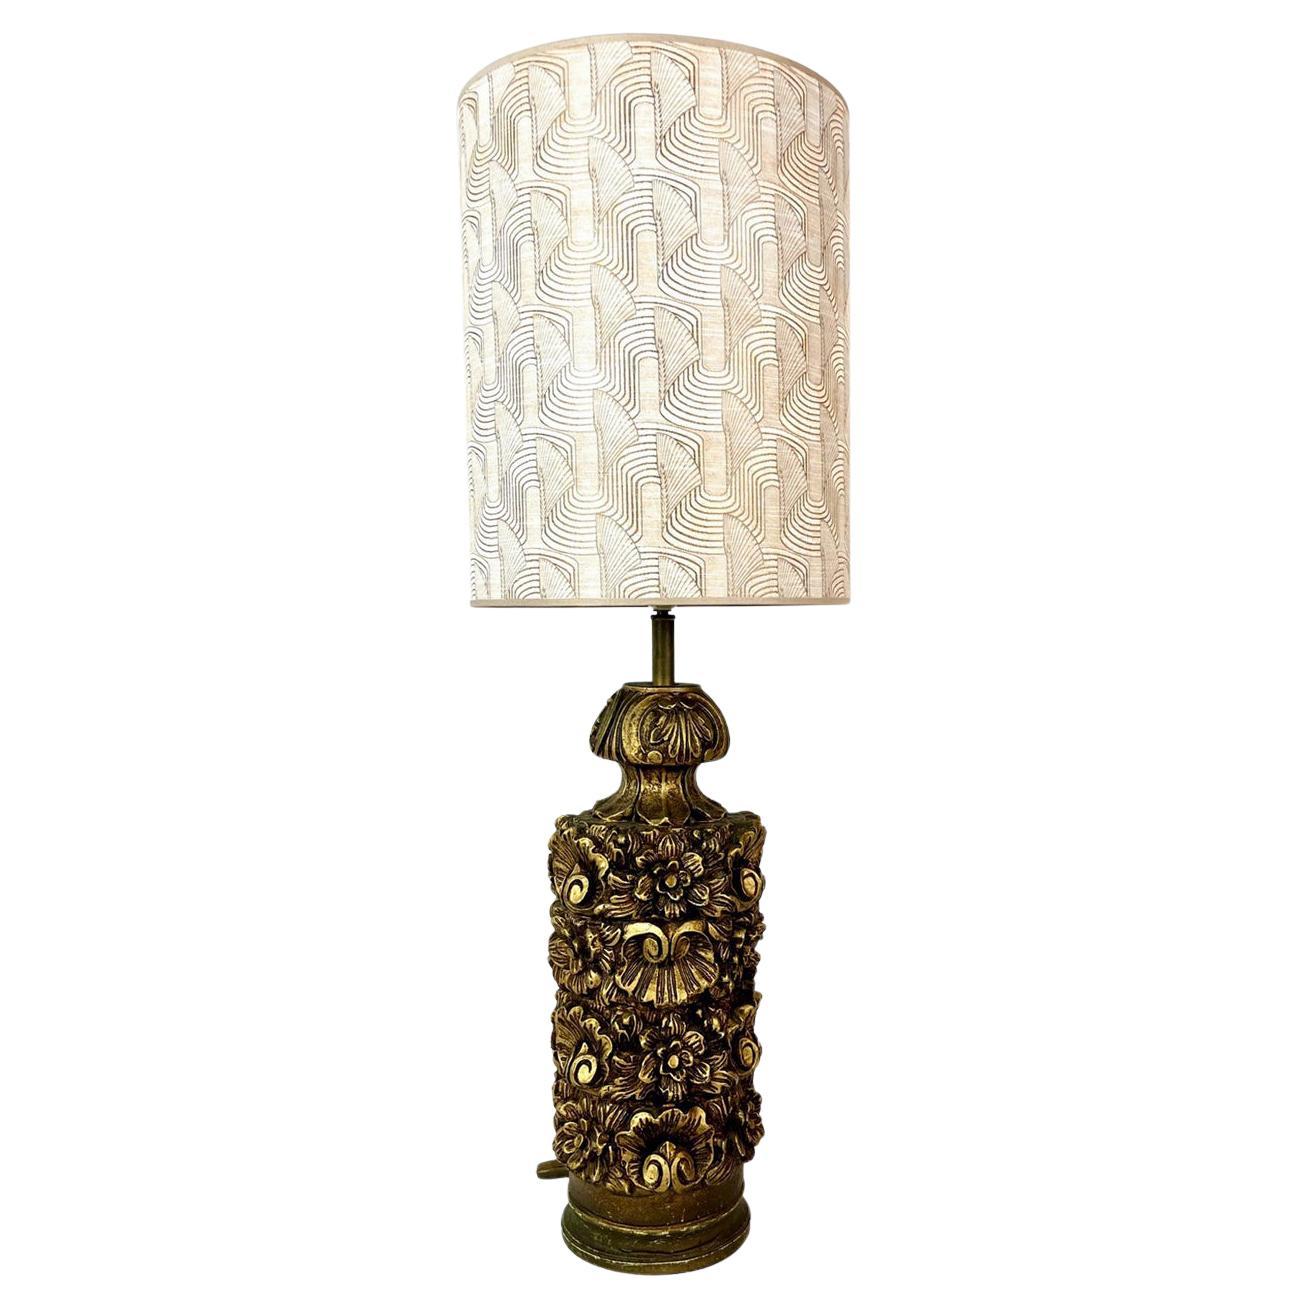 Stylish Italian table lamp. The table lamp is handcrafted with a floral pattern and painted with gold paint. 
Inclusive lamp shade with bronze inner shade

The lamp is from the 1950s and is still in very good condition. 

